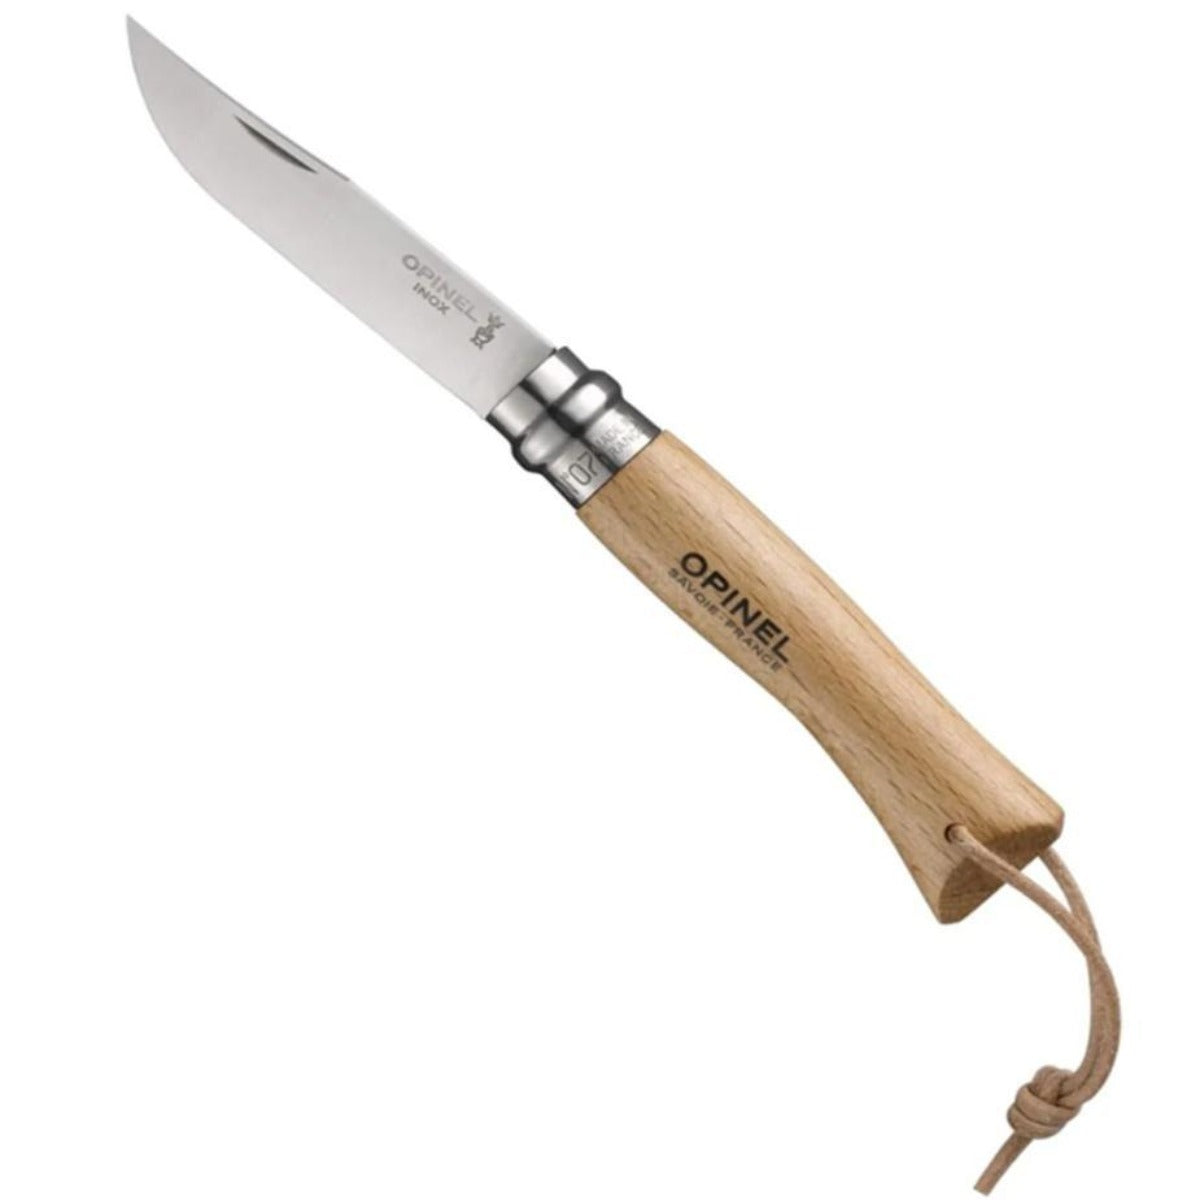 Opinel  No.07 Stainless Steel Pocket Knife - OPINEL USA